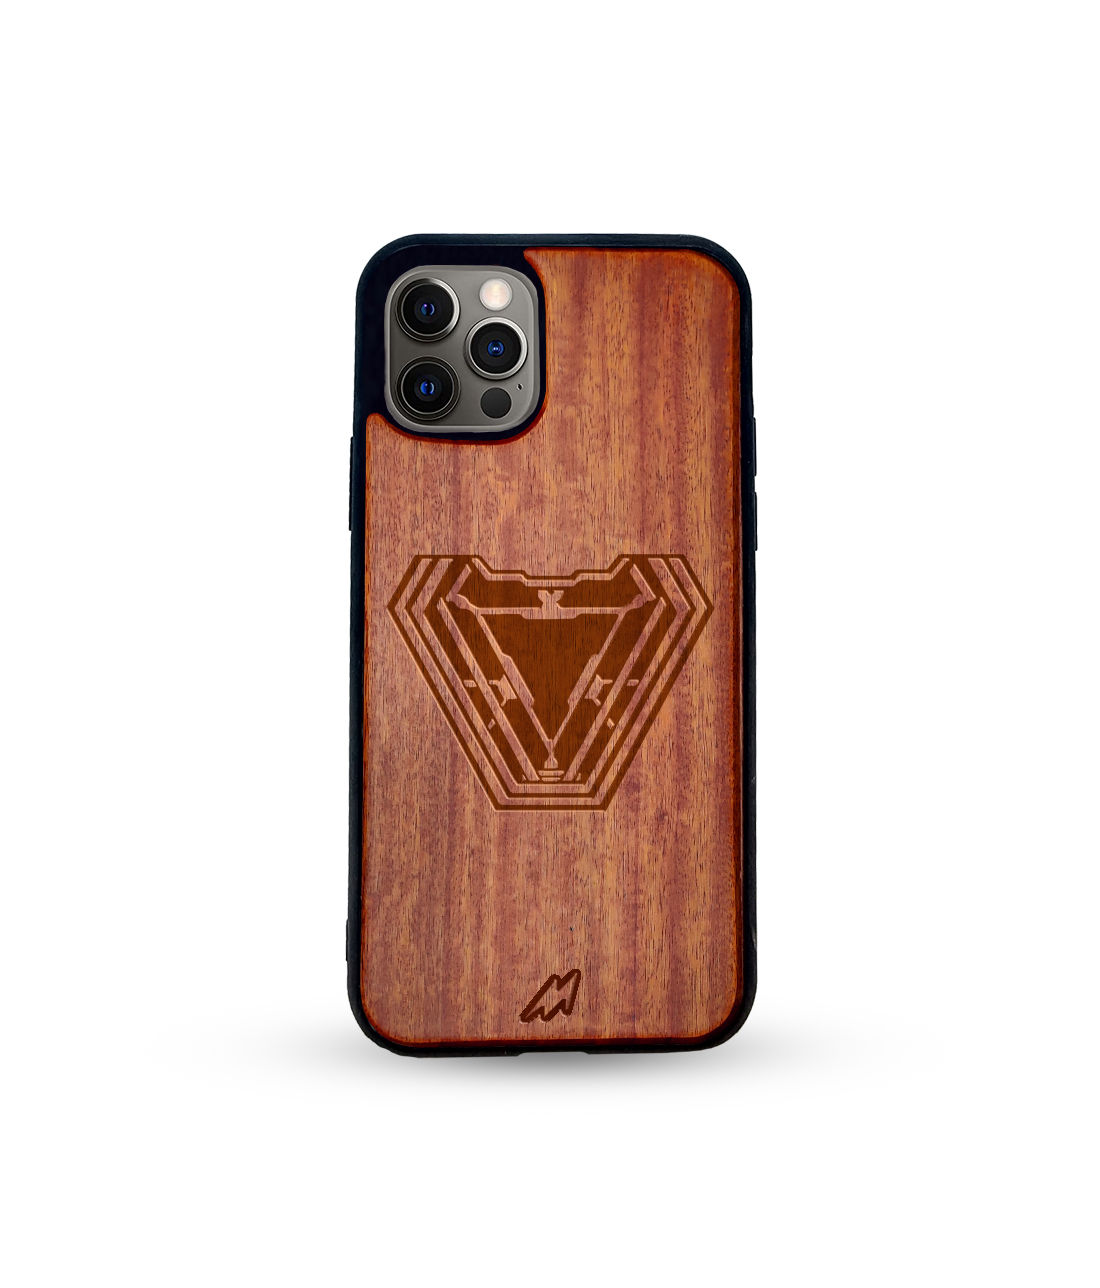 Iron Man Infinity Arc Reactor - Dark Shade Wooden Phone Case for iPhone 12 Pro